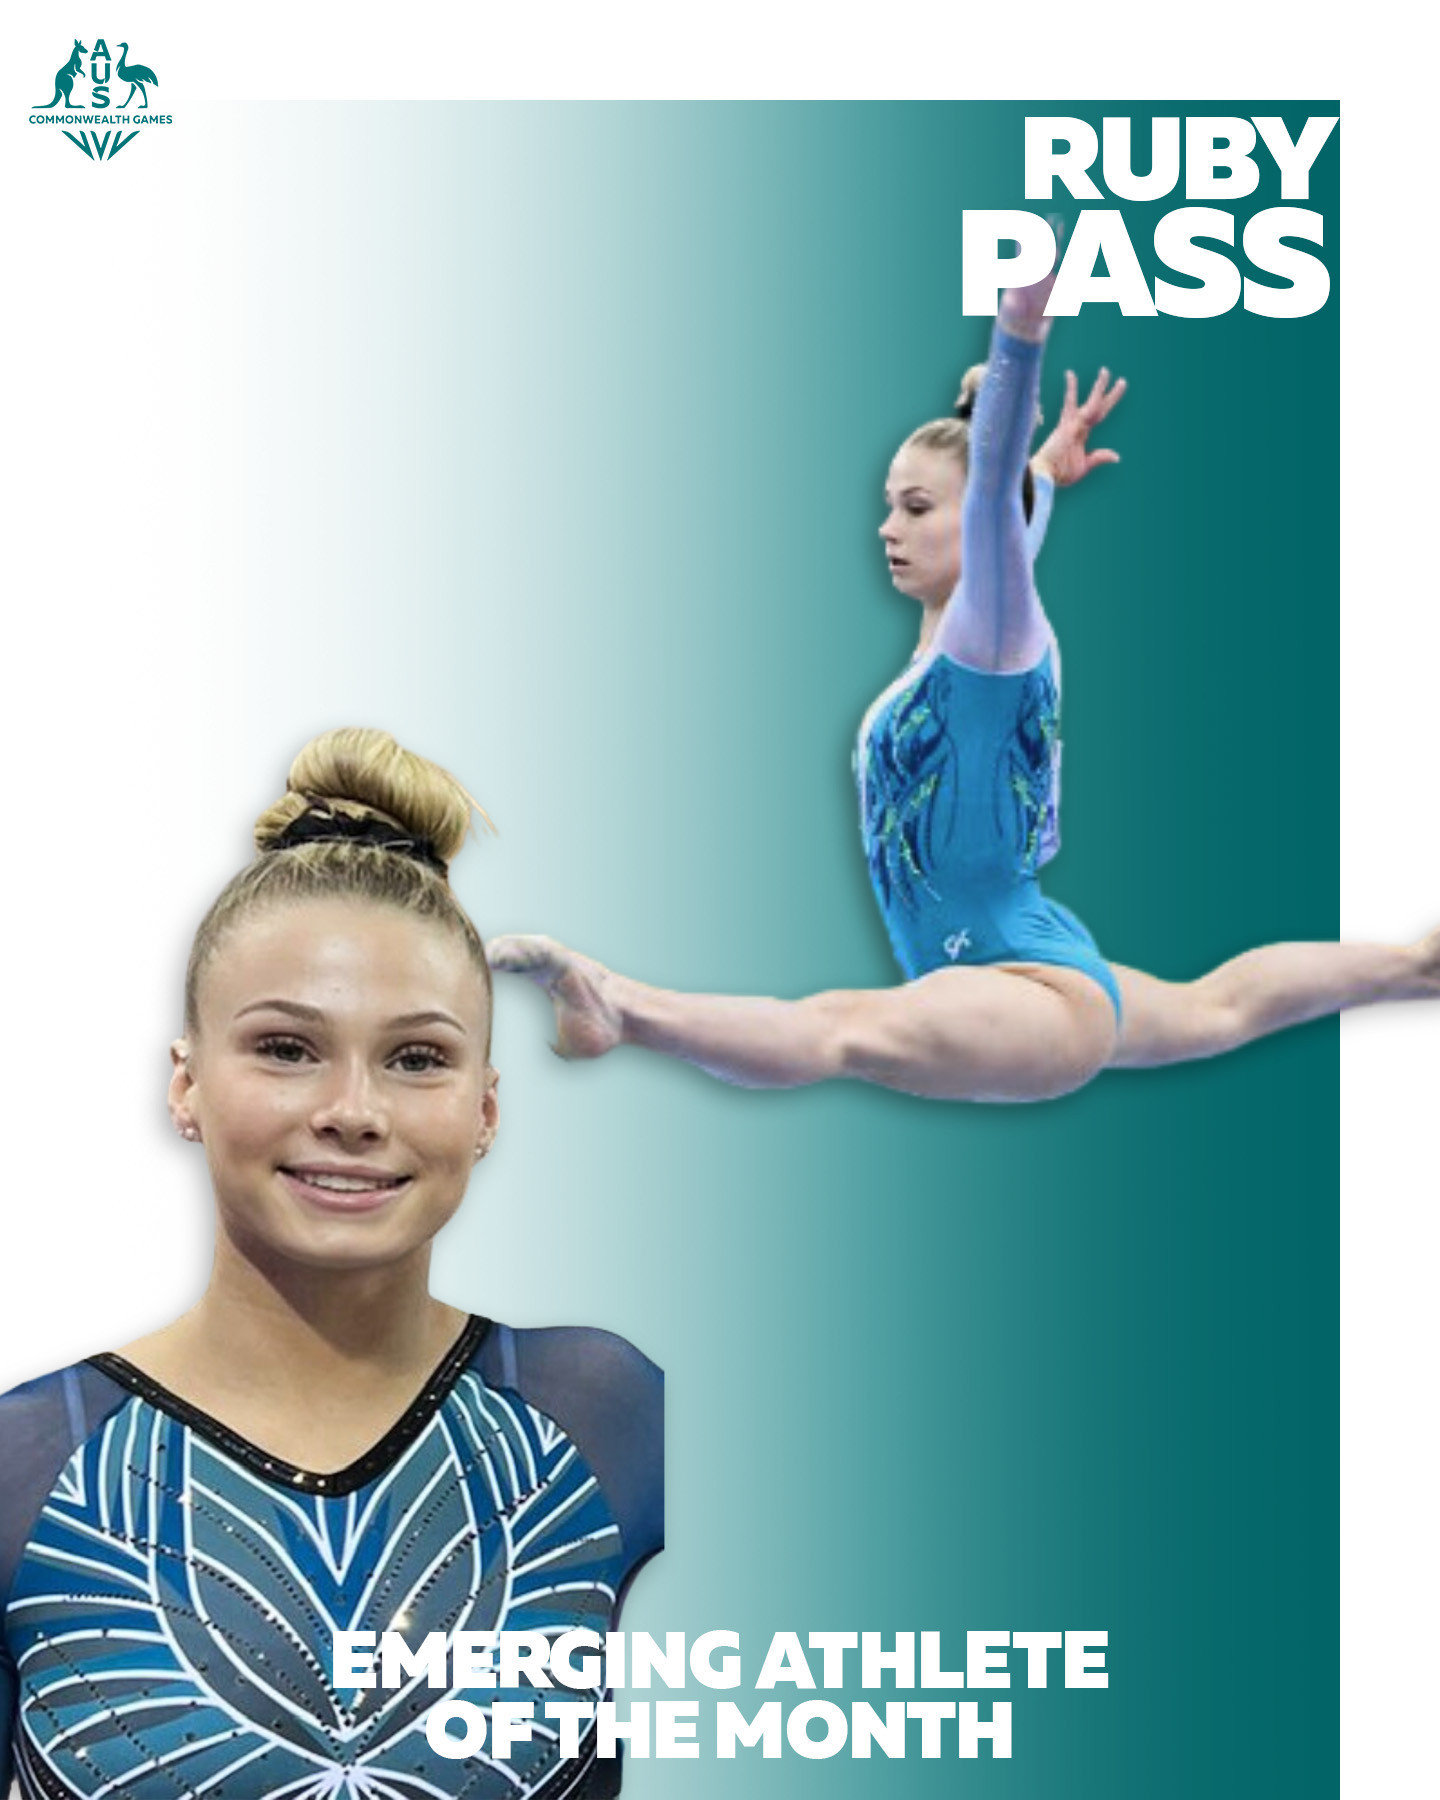 Artistic gymnast Ruby Pass, who says she is proud to represent Australia, has been named as an athlete to watch by Commonwealth Games Australia ©Commonwealth Games Australia